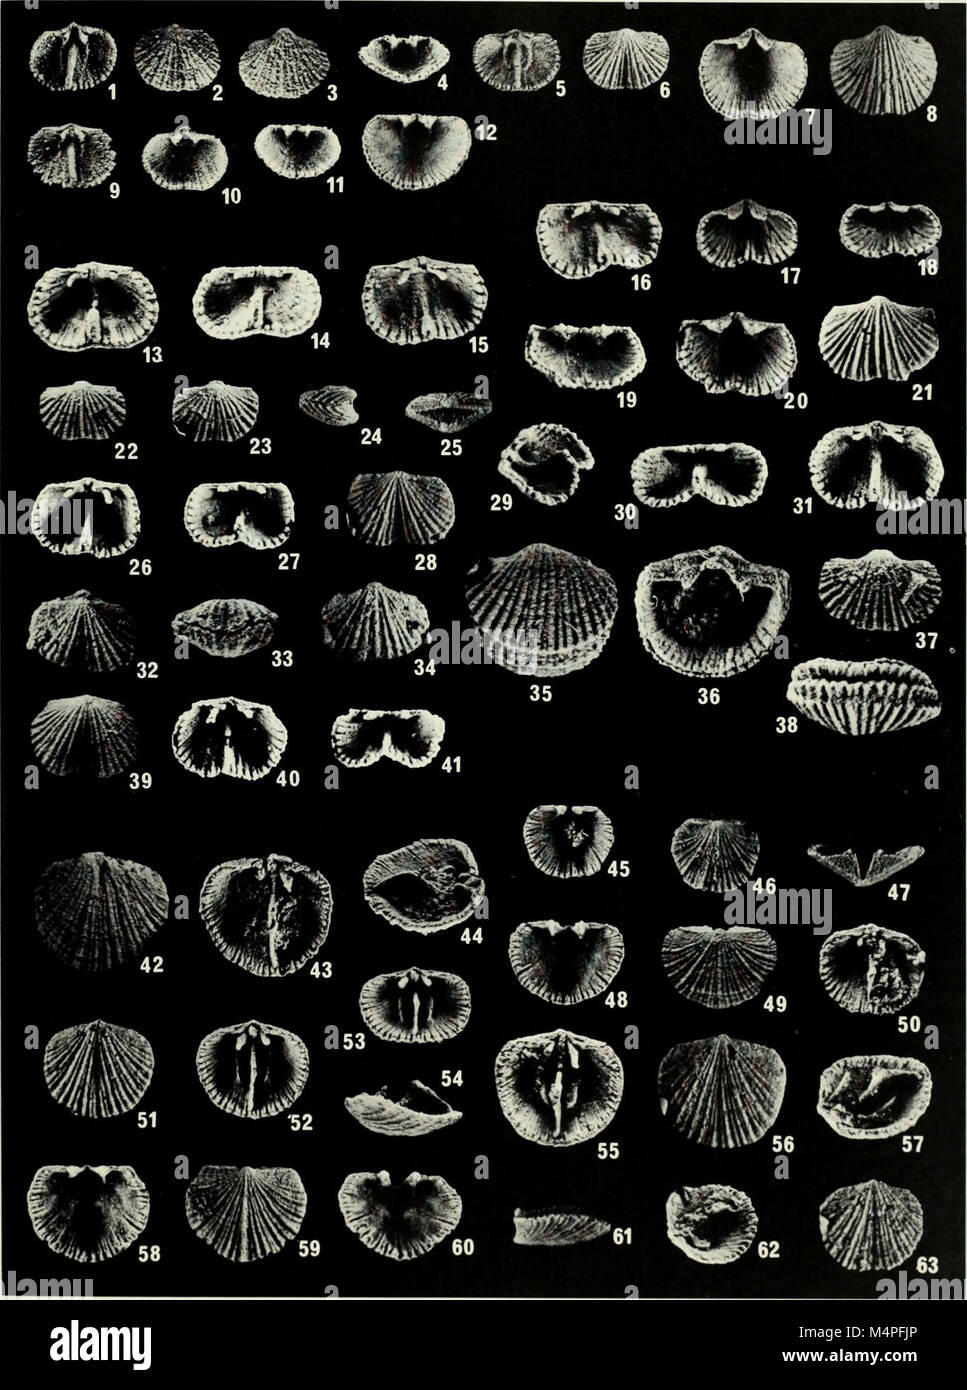 Brachiopoda and biostratigraphy of the Silurian-Devonian Delorme Formation in the District of Mackenzie, the Yukon (1984) (20398765052) Stock Photo